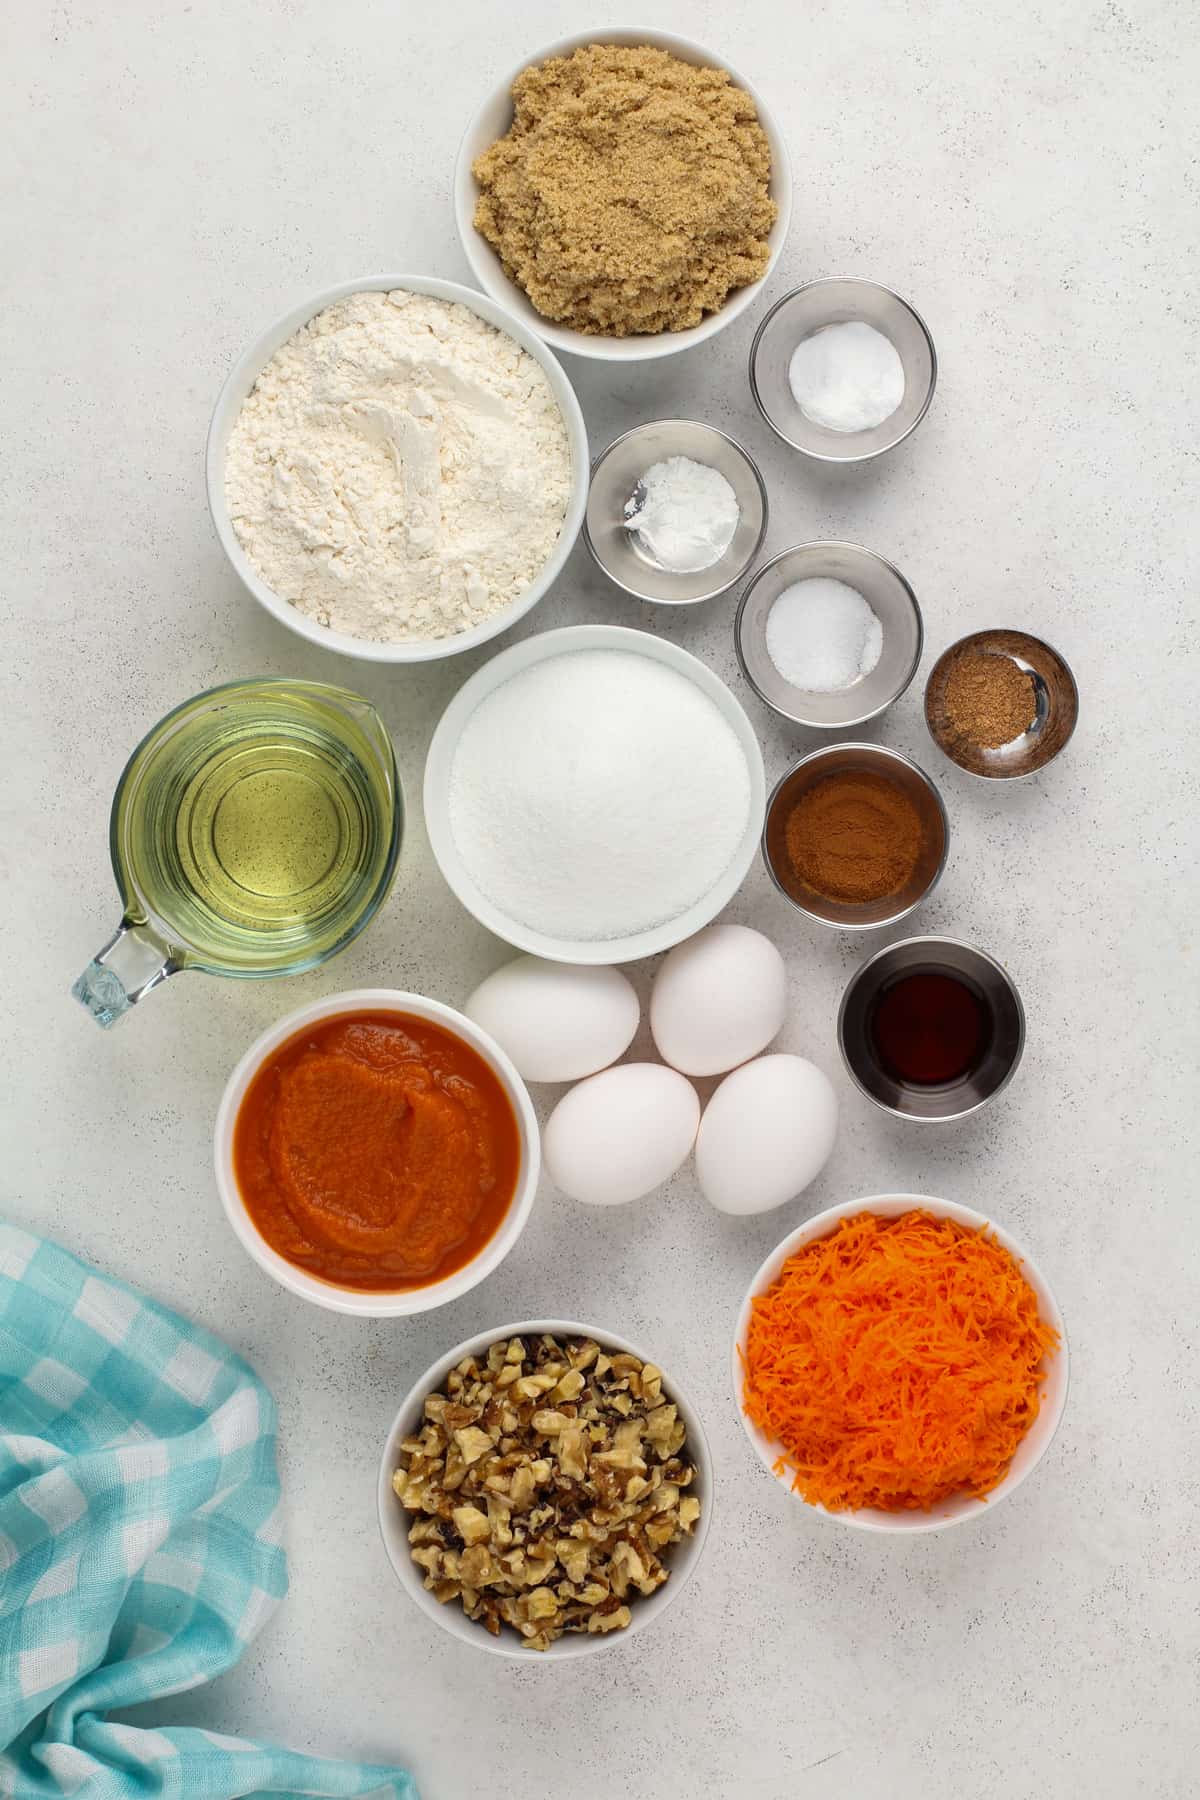 Ingredients for carrot bundt cake arranged on a light-colored countertop.